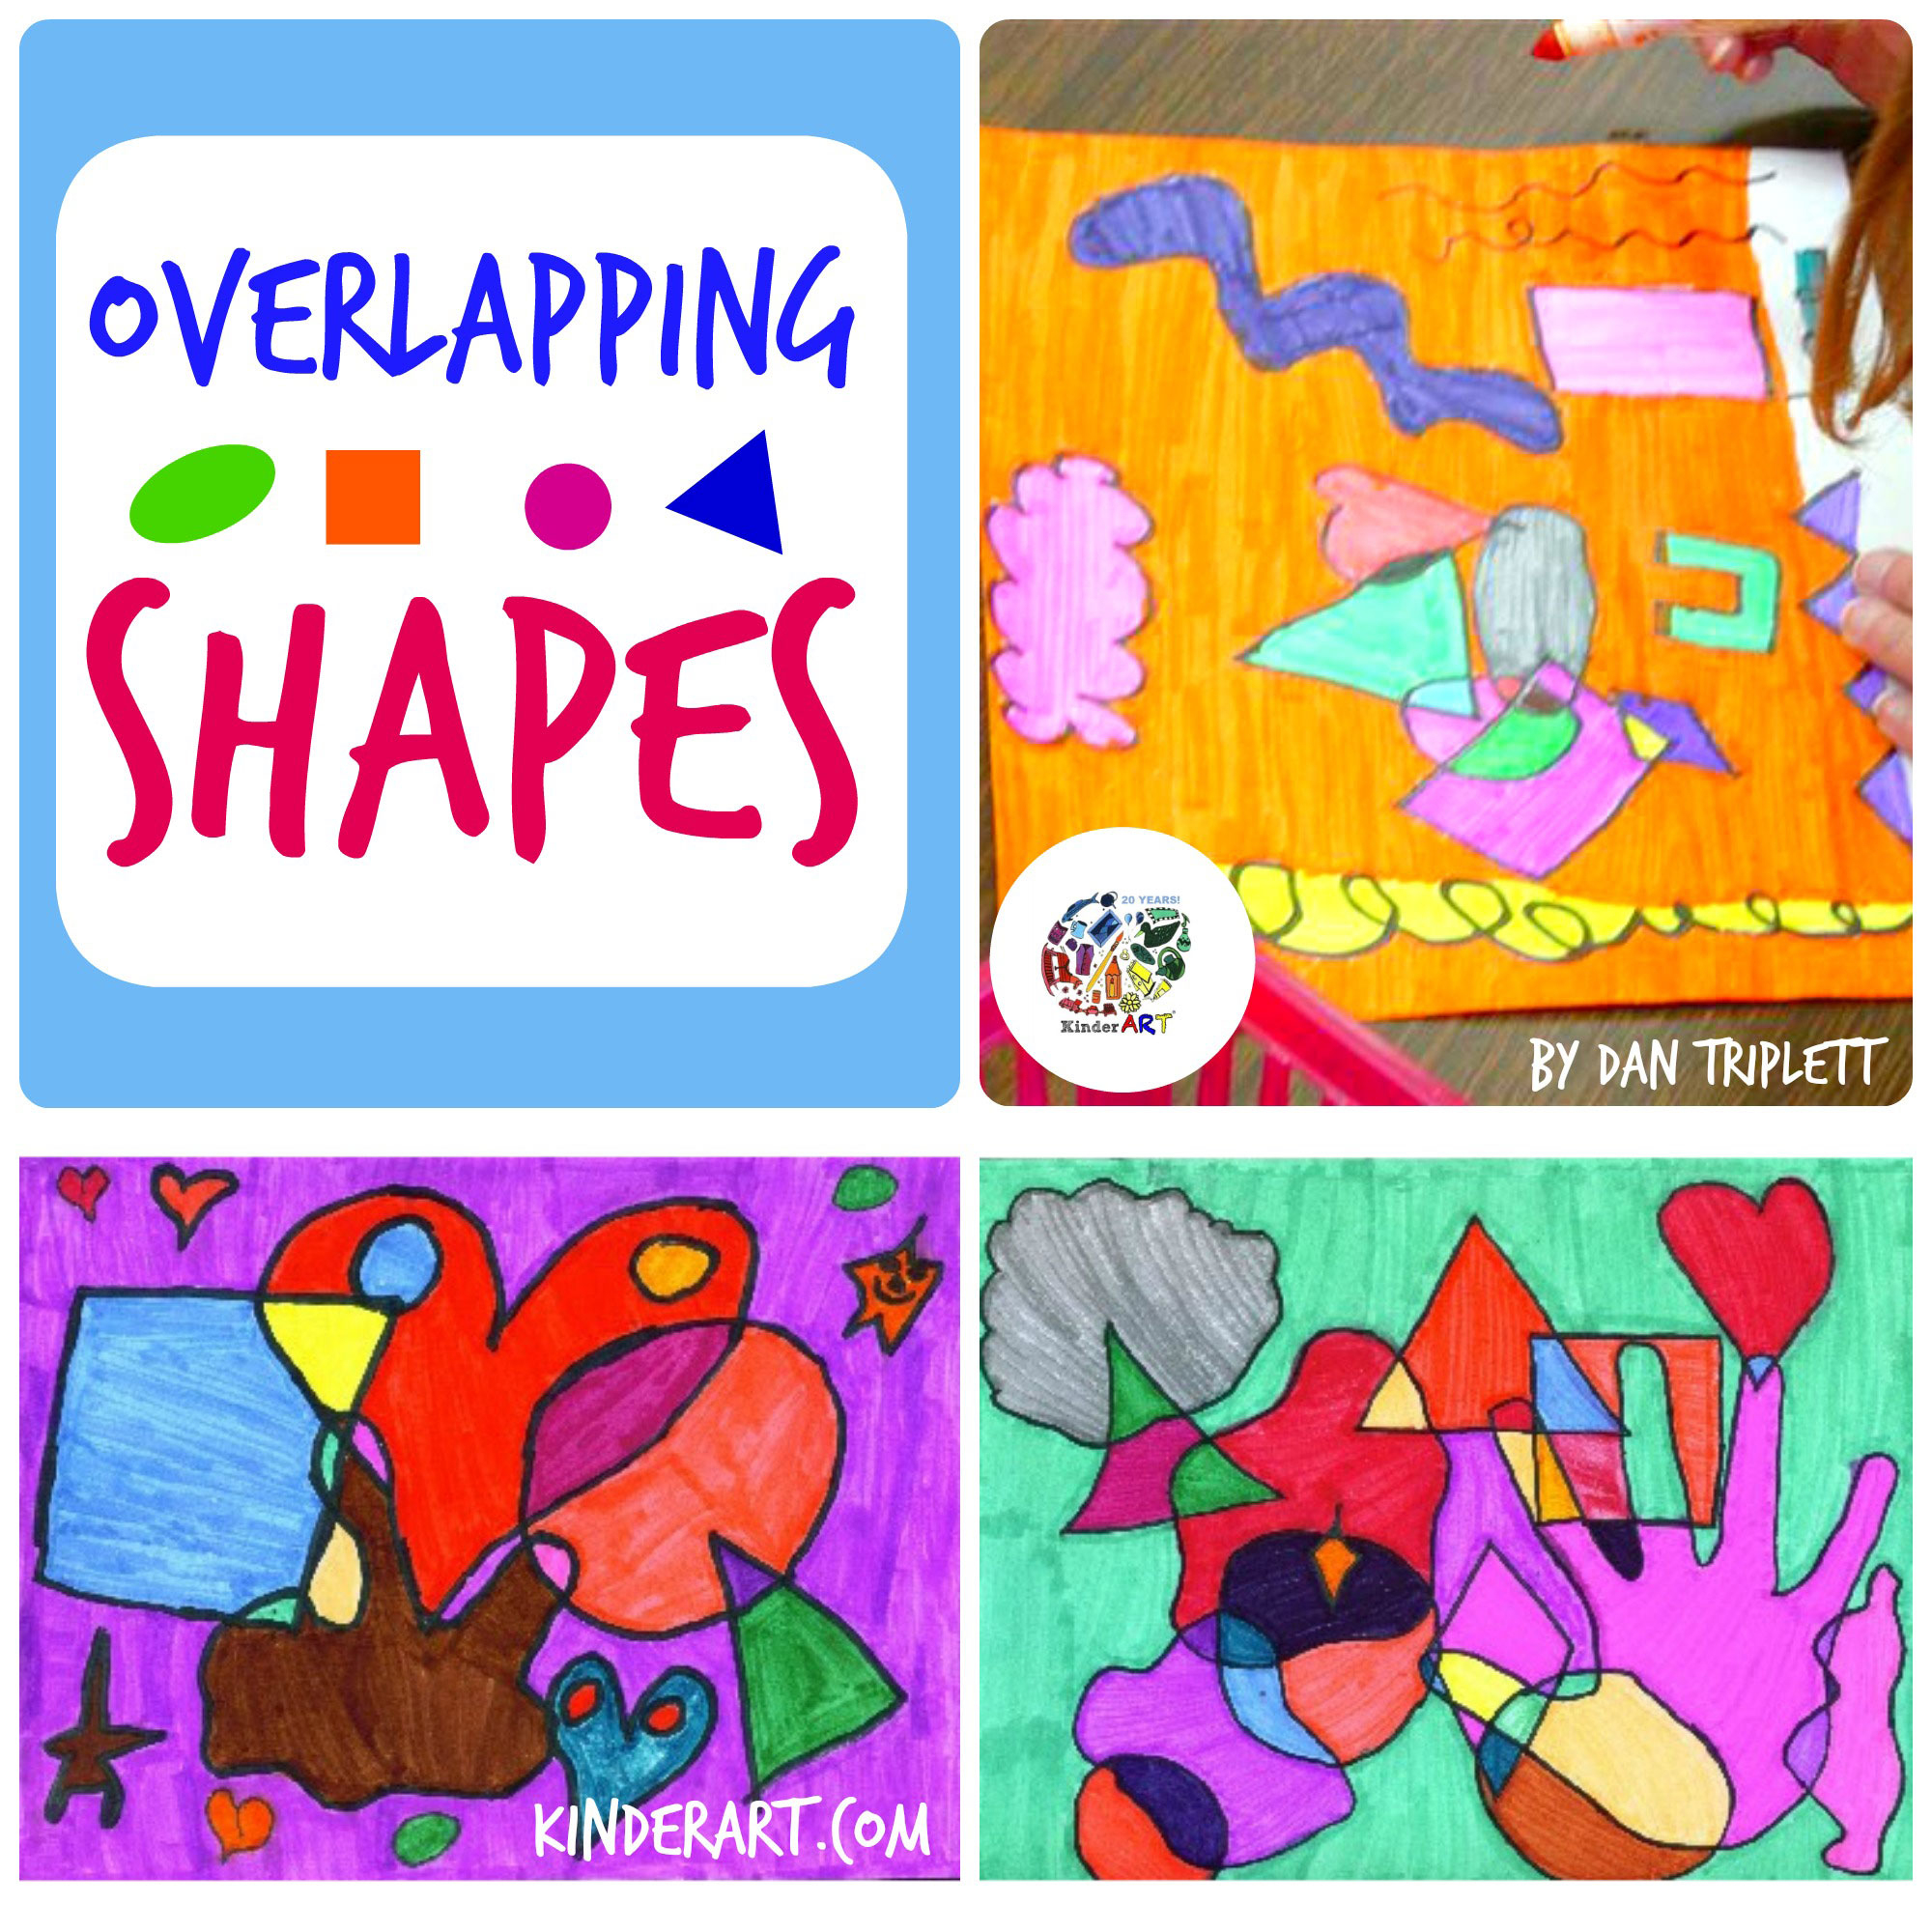 Overlapping Shapes Art Lesson Plan For Elementary School